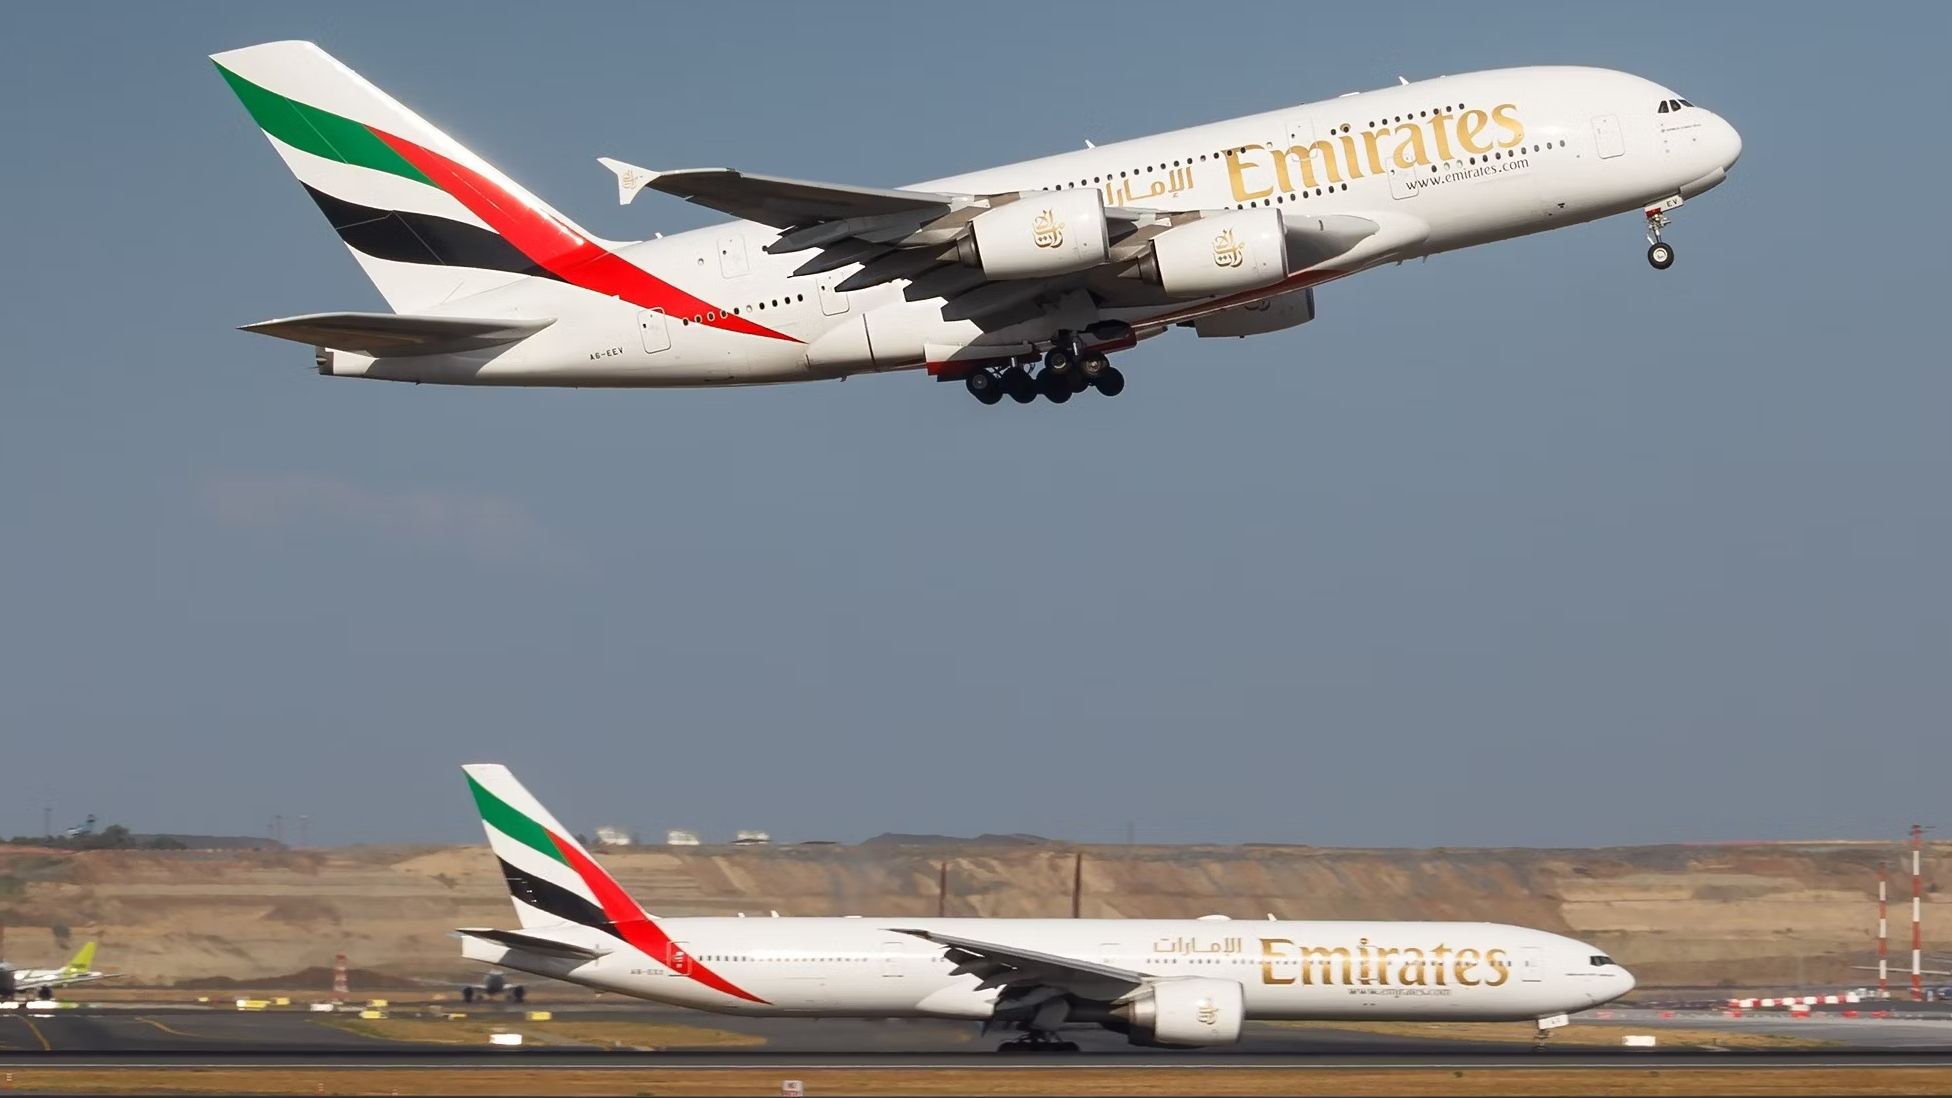 An Emirates Airbus A380 taking off while an Emirates Boeing 777 sits on a taxiway.